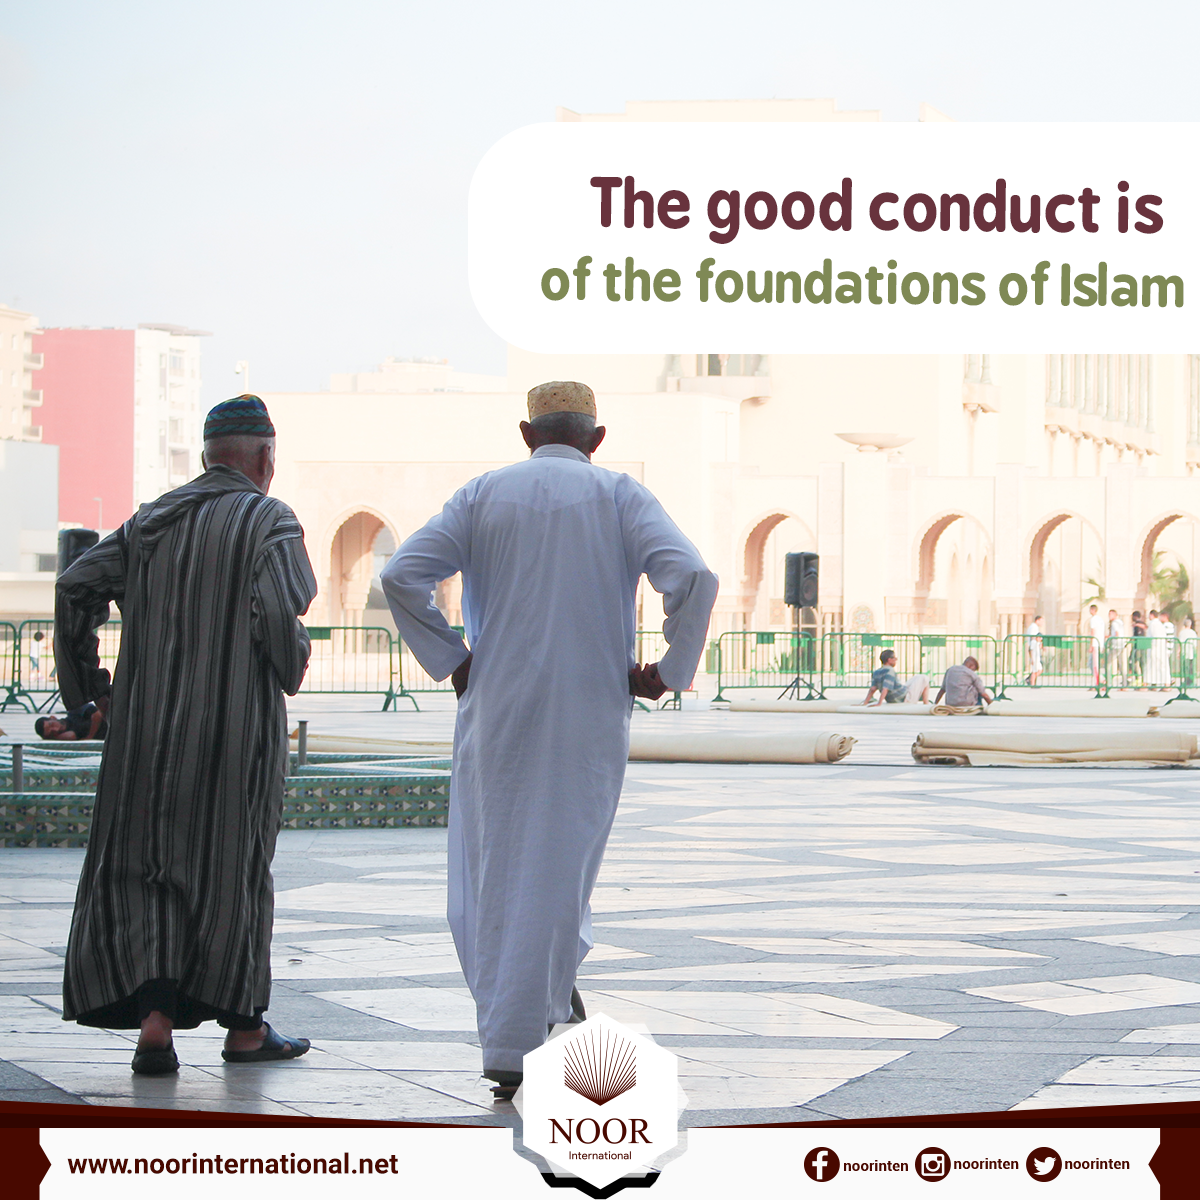 The good conduct is of the foundations of Islam